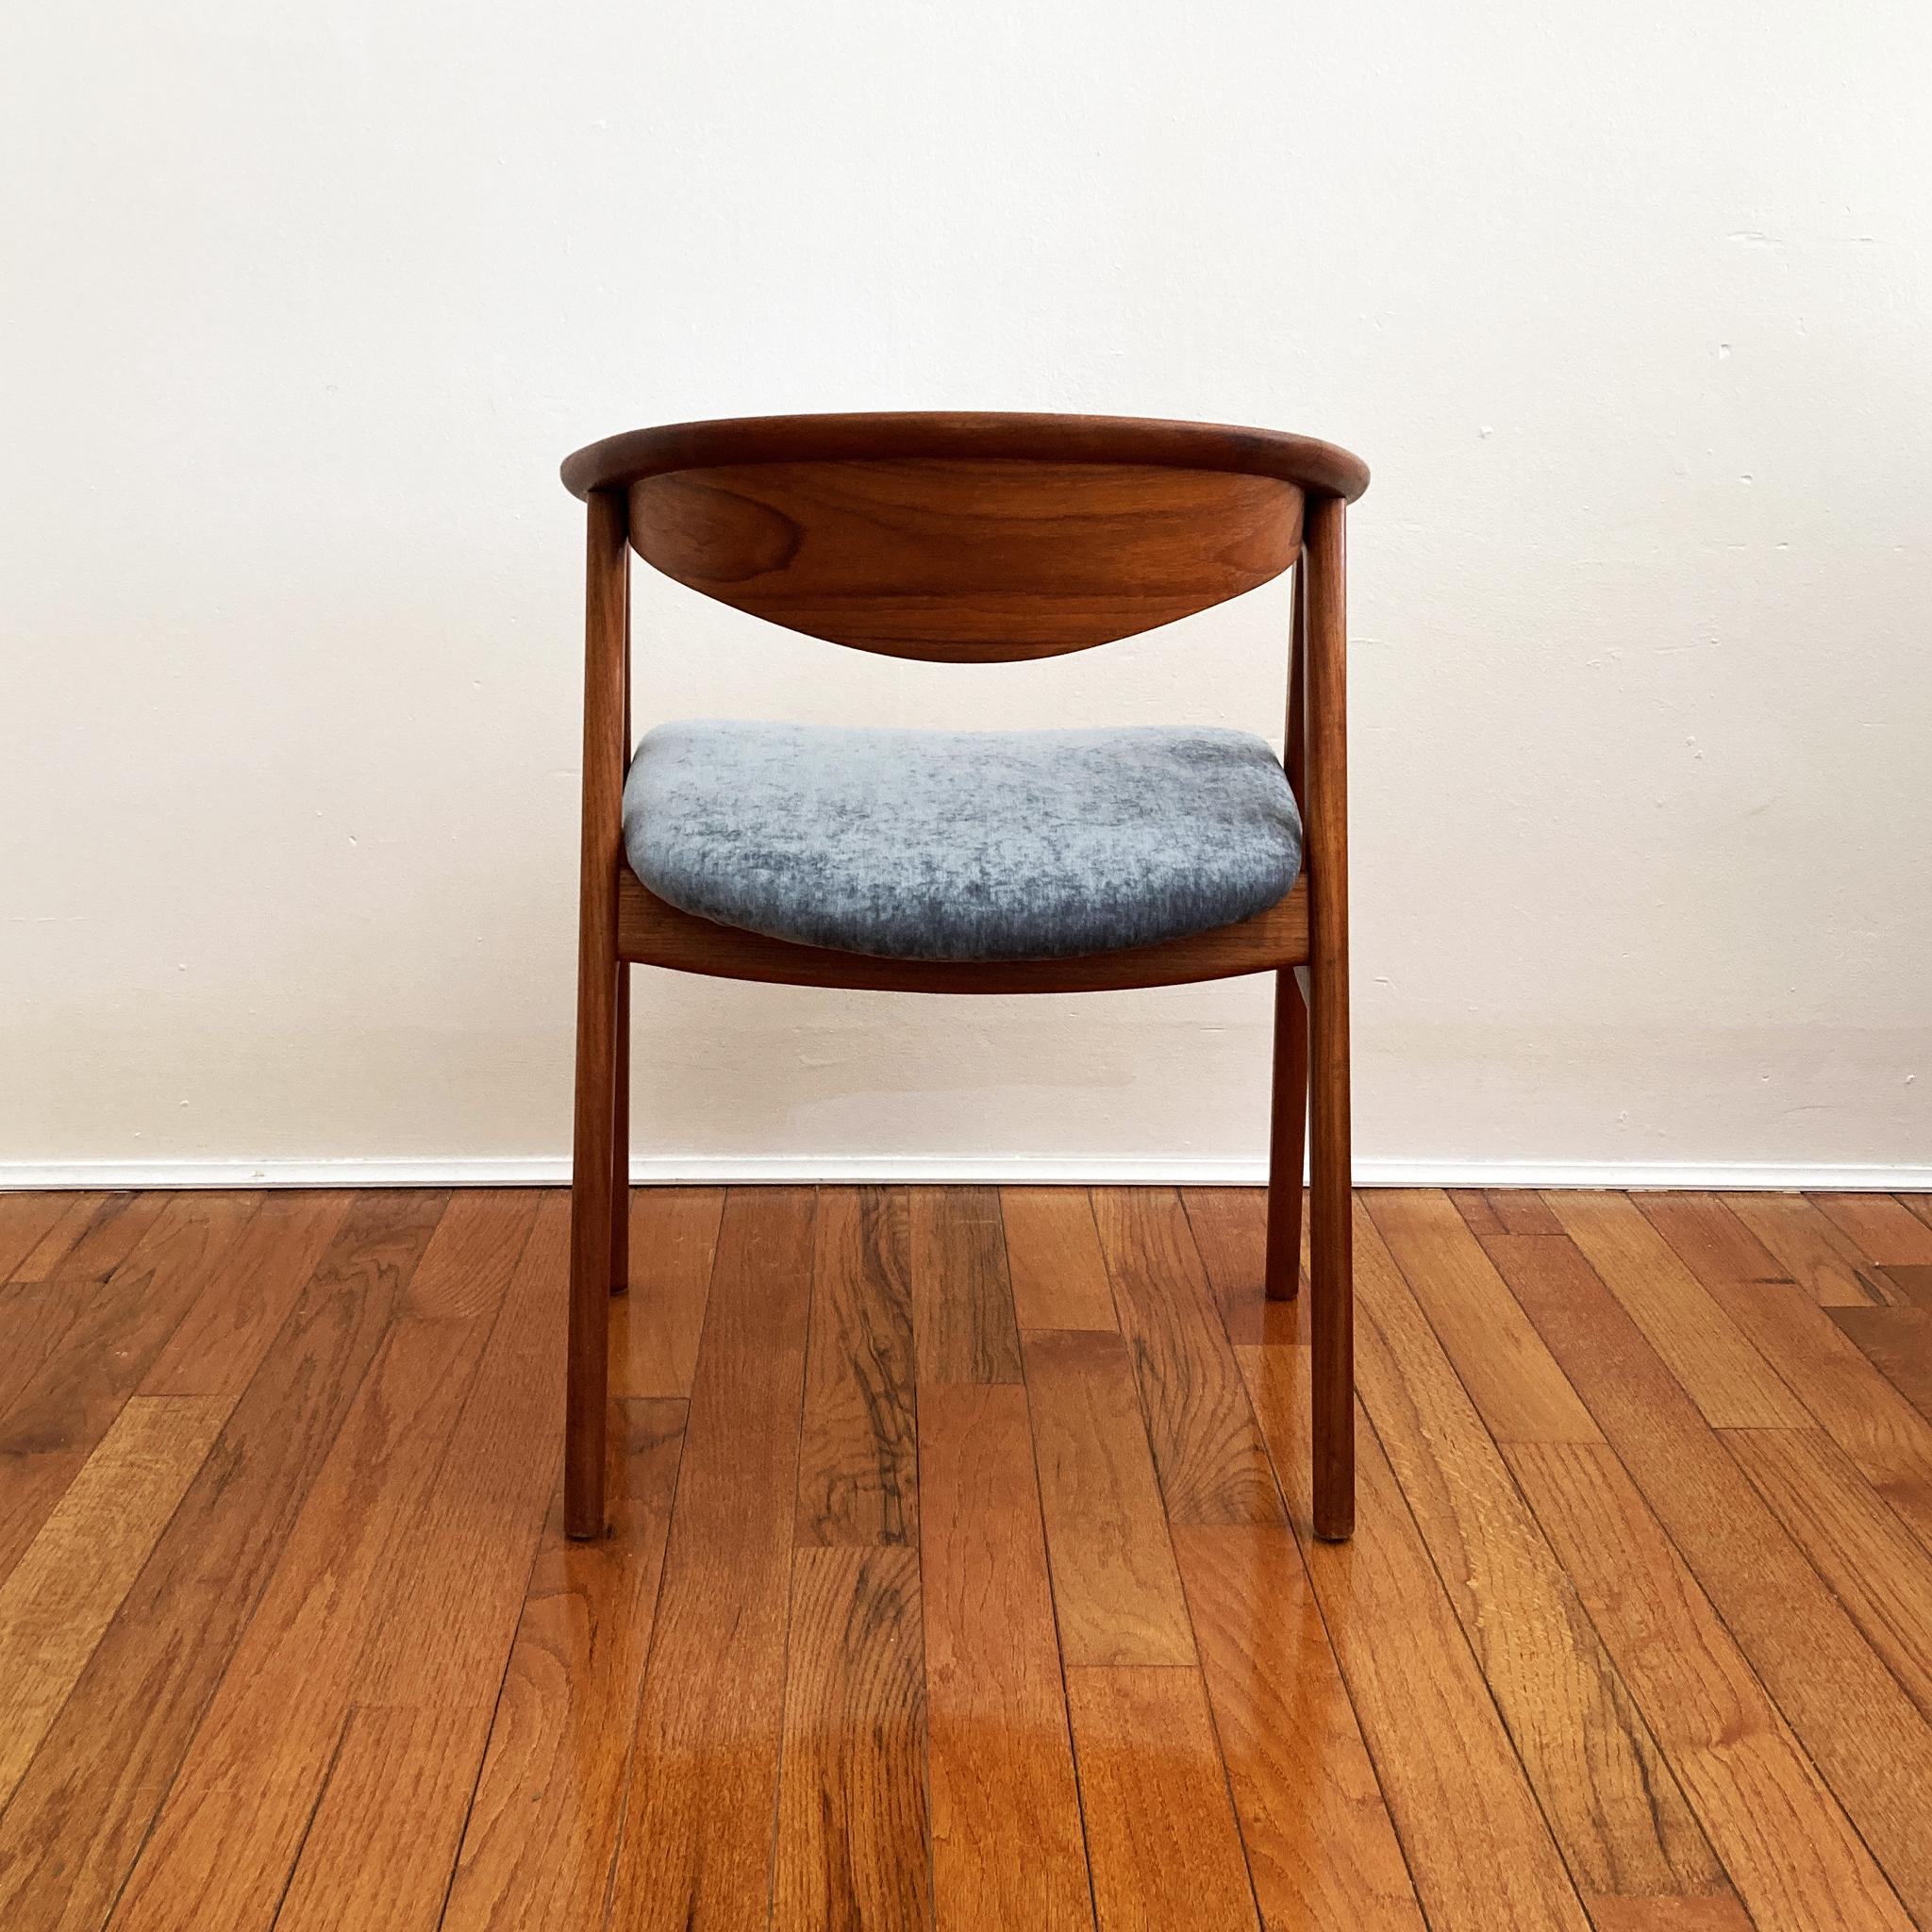 Erik Kirgegaard Model 52 Teak Armchair with Gray Velvet Seat, 1950s In Good Condition For Sale In New York, NY